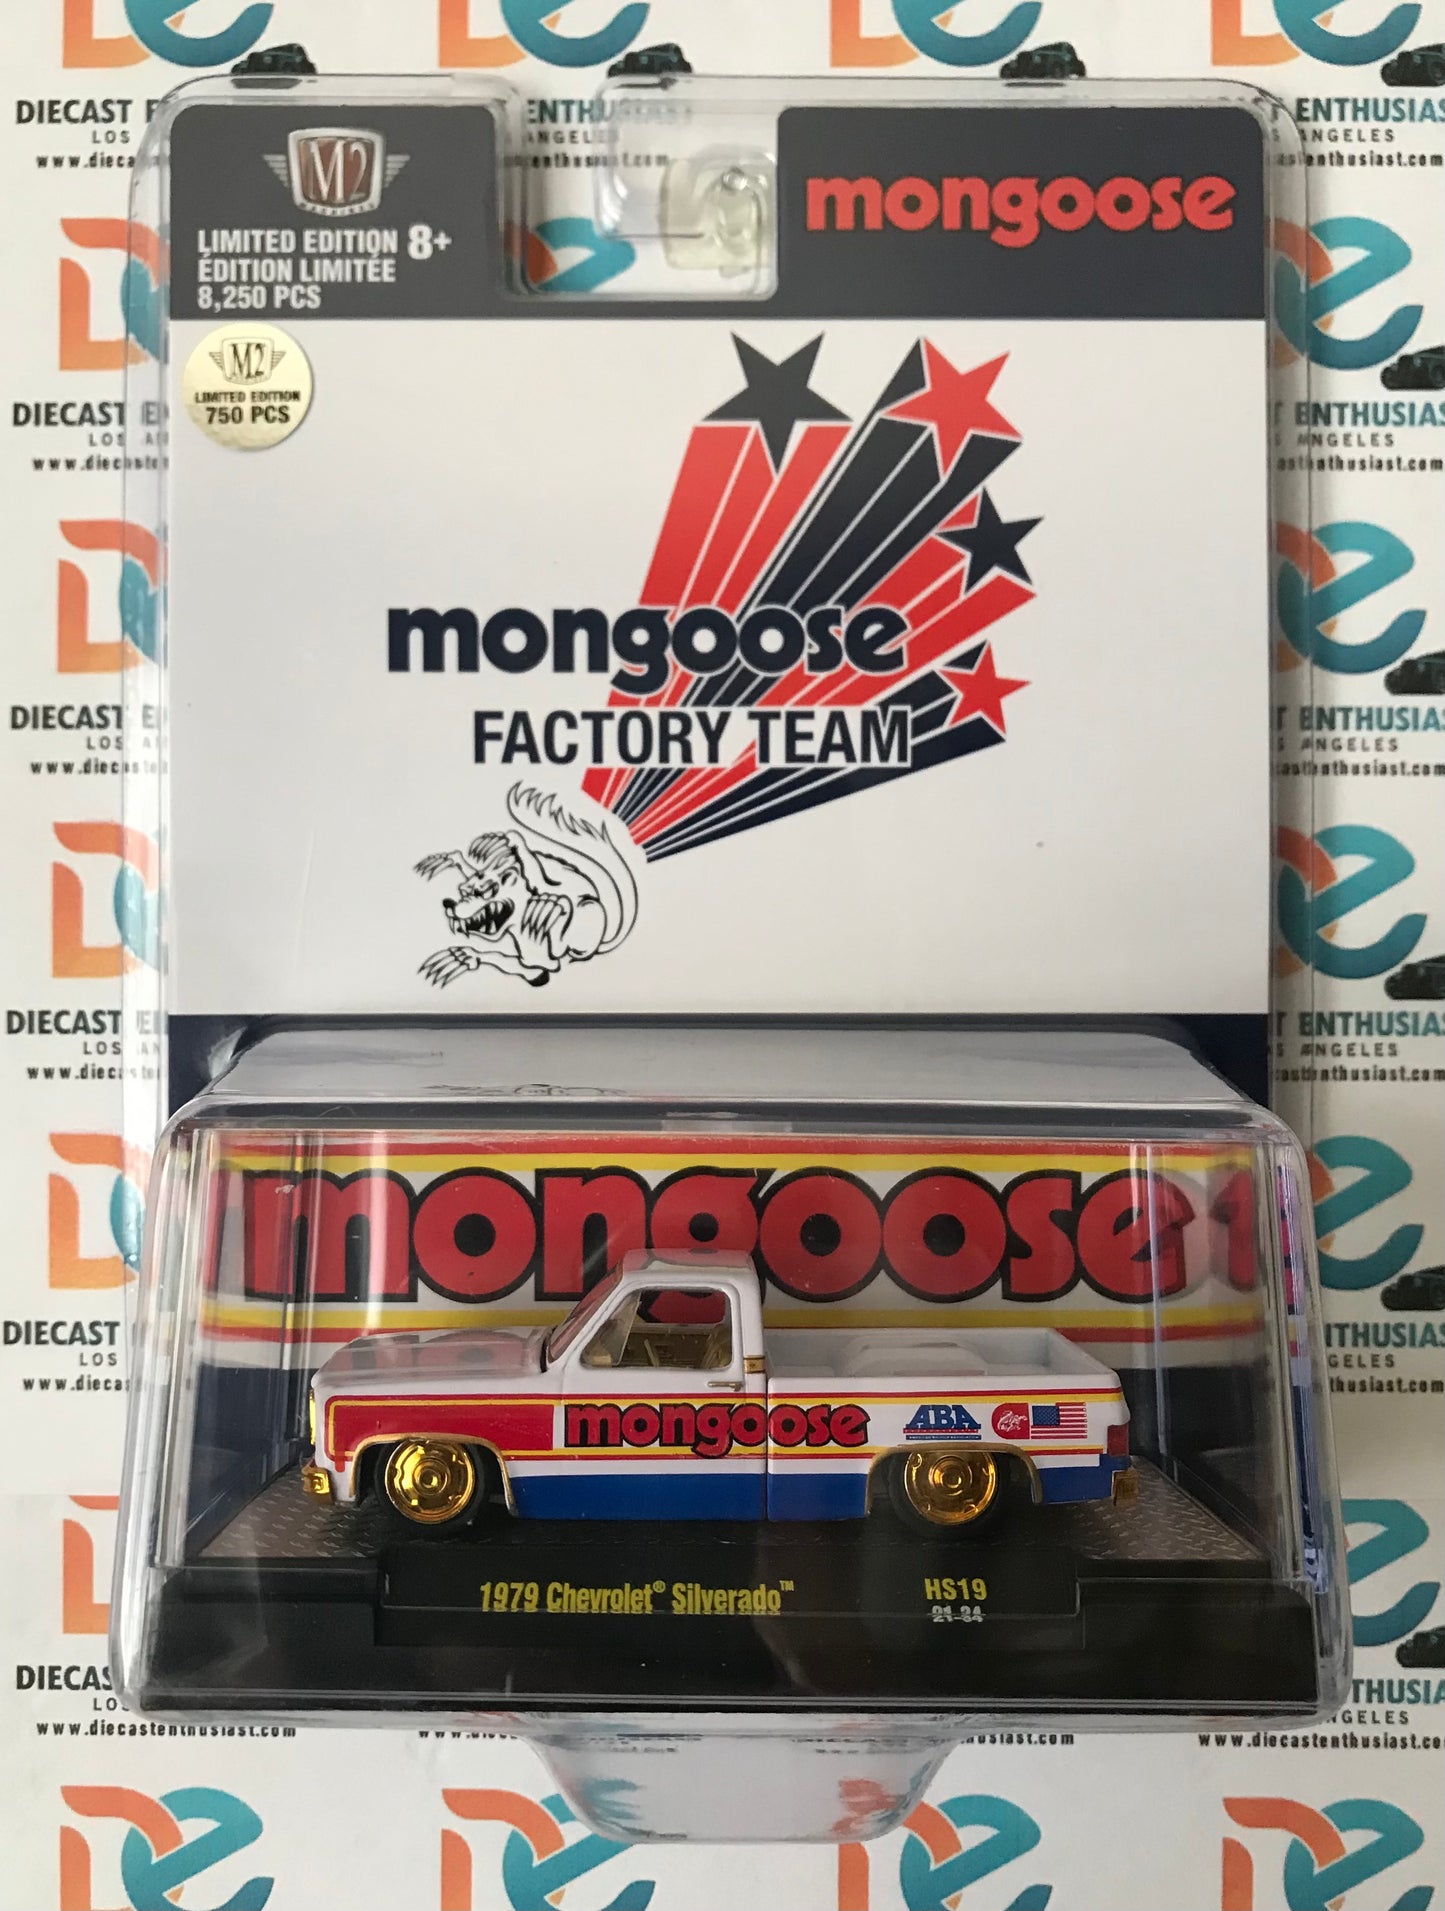 CHASE M2 Machines Mongoose Factory Team 1979 Chevrolet Truck 1:64